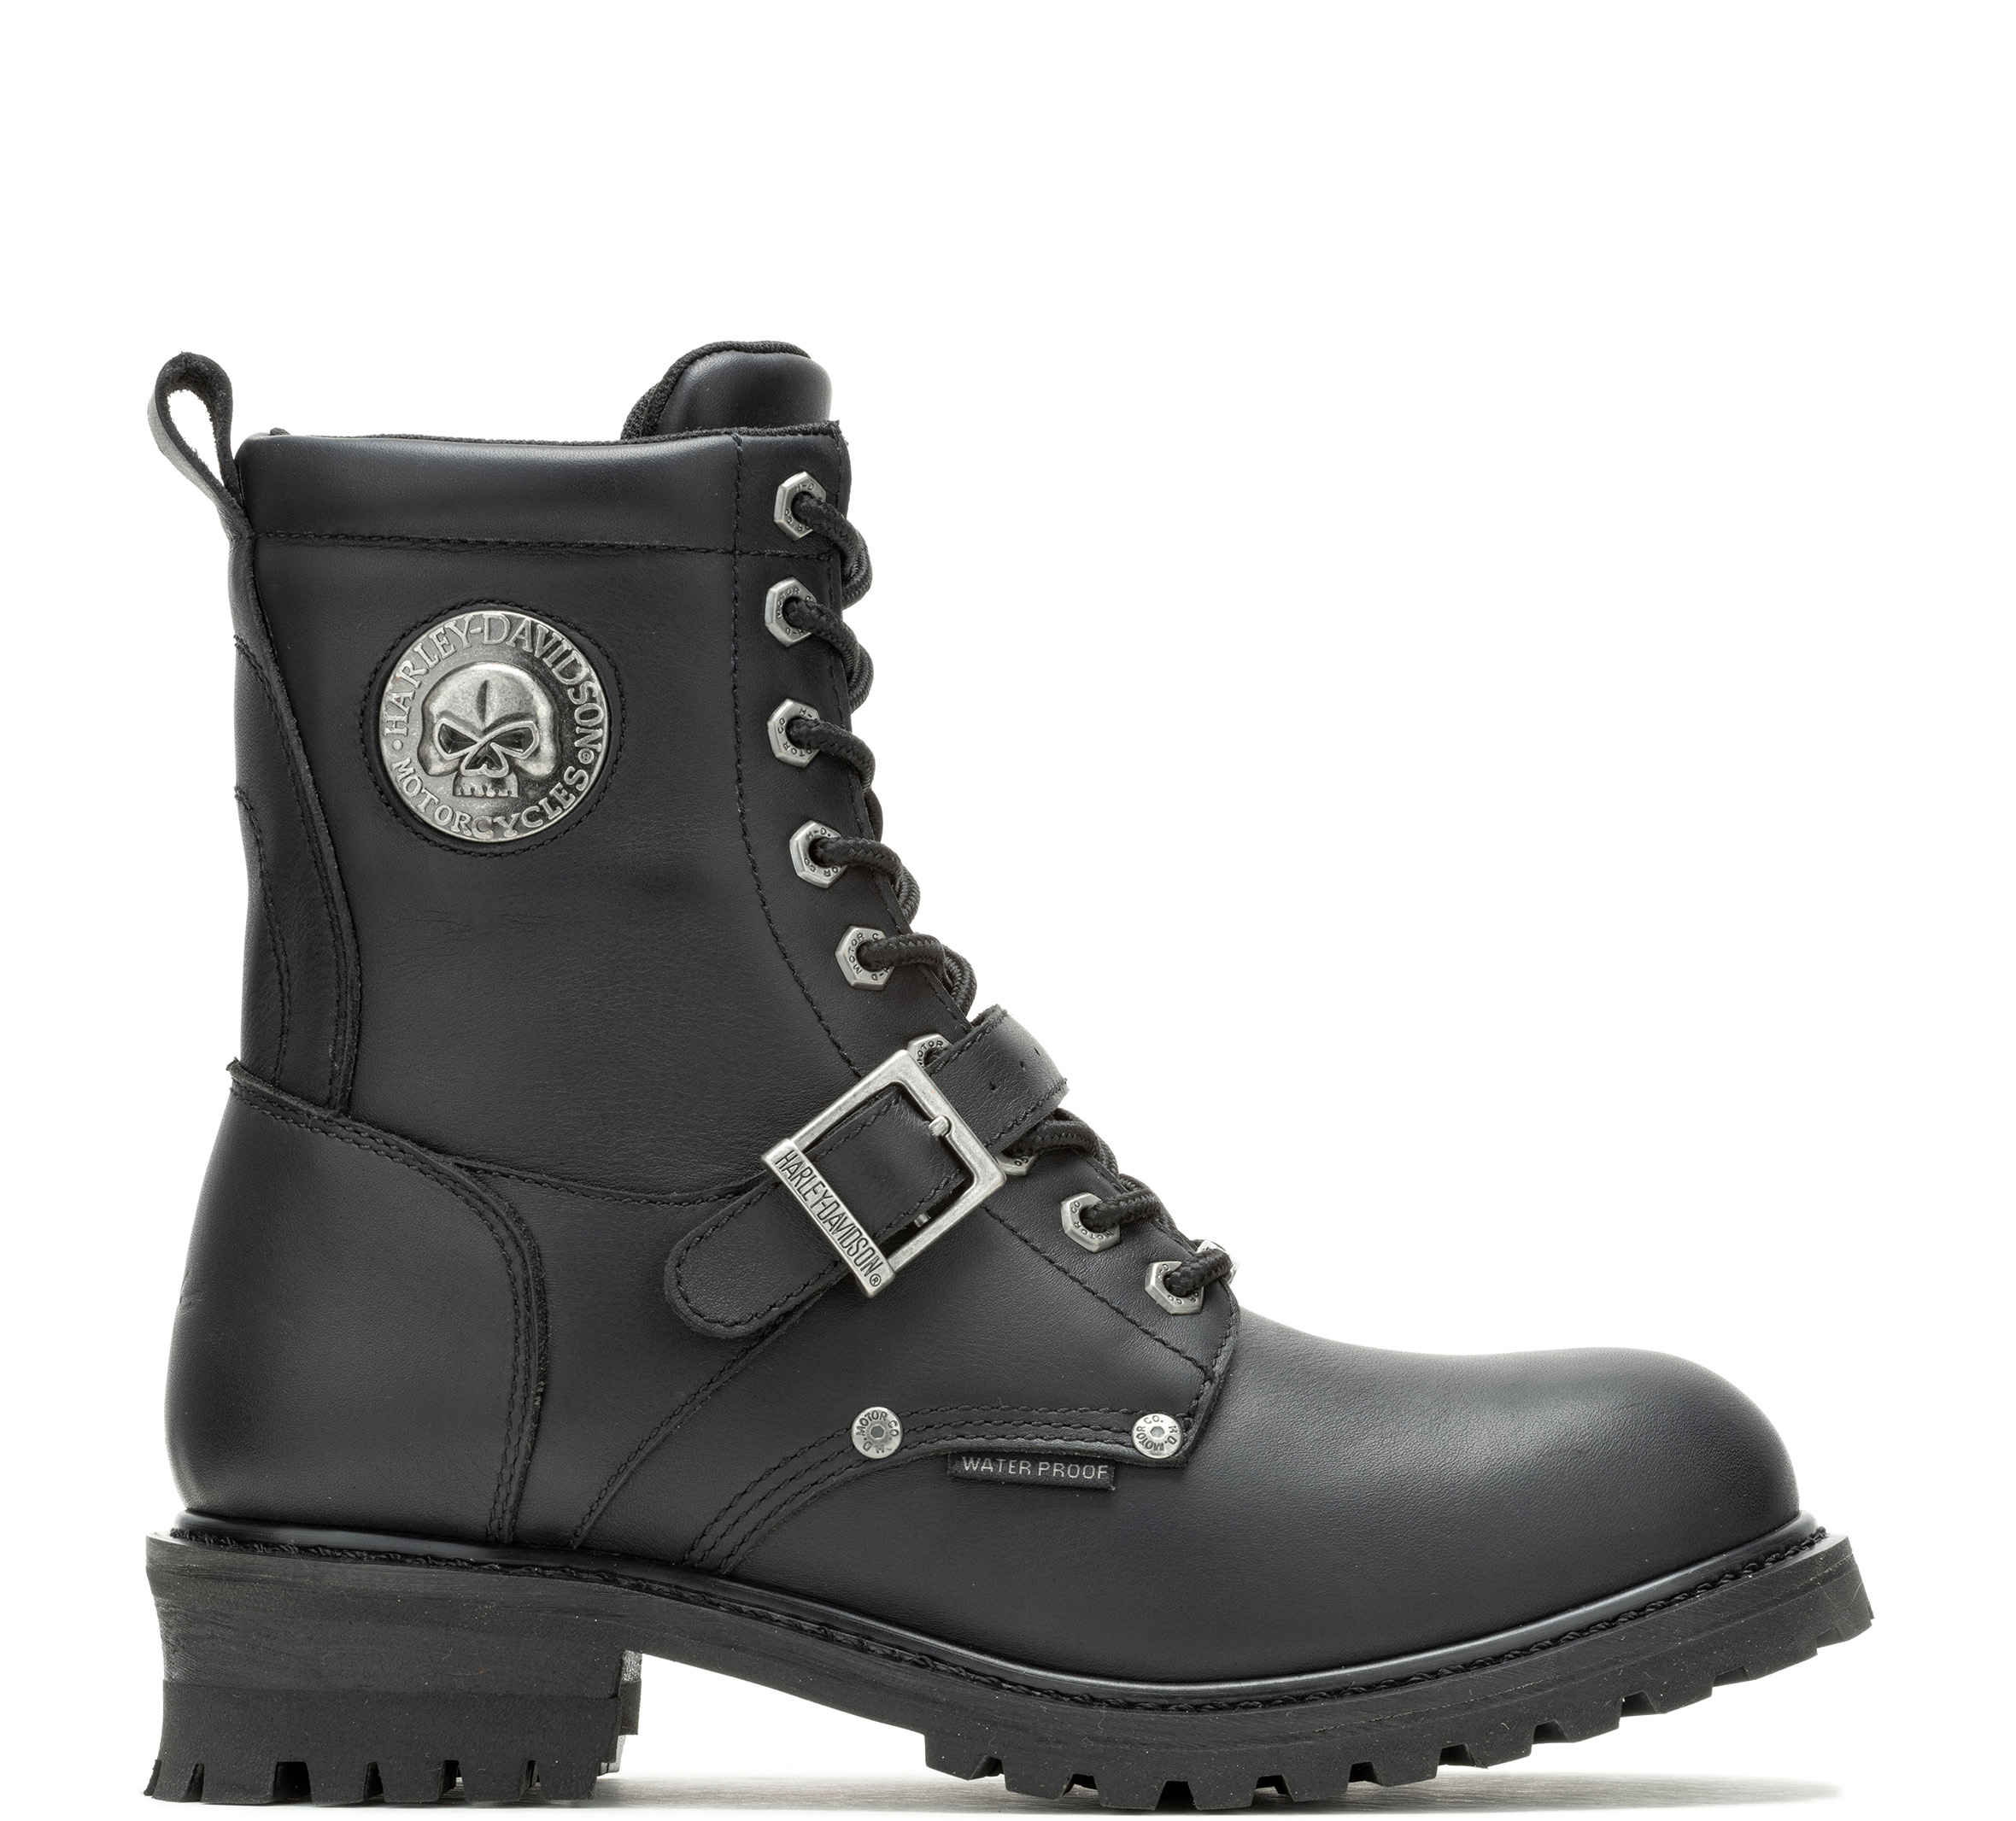 Men's Motorcycle Boots & Shoes | Harley-Davidson Europe